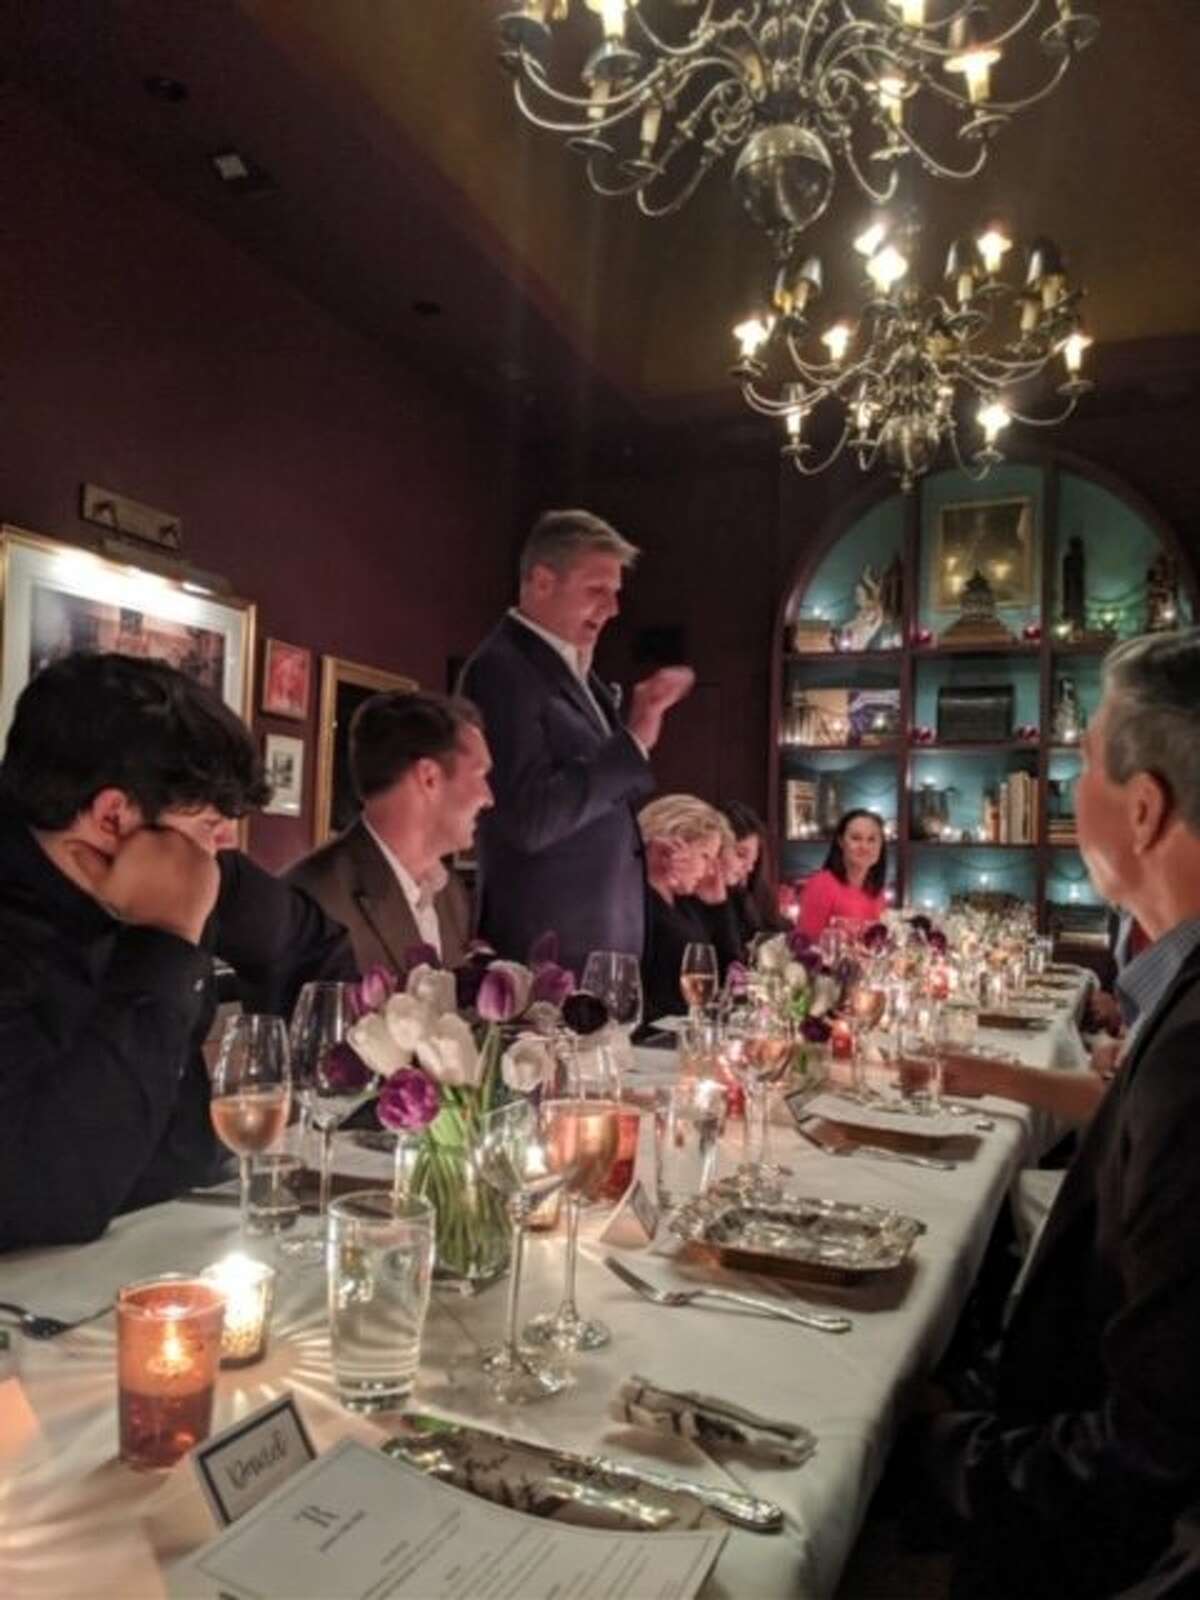 Golden State Warriors president Rick Welts addresses a group of friends and family at Marianne's, a salon in the Cavalier restaurant. Welts married his partner, Todd Gage, at City Hall earlier that day.